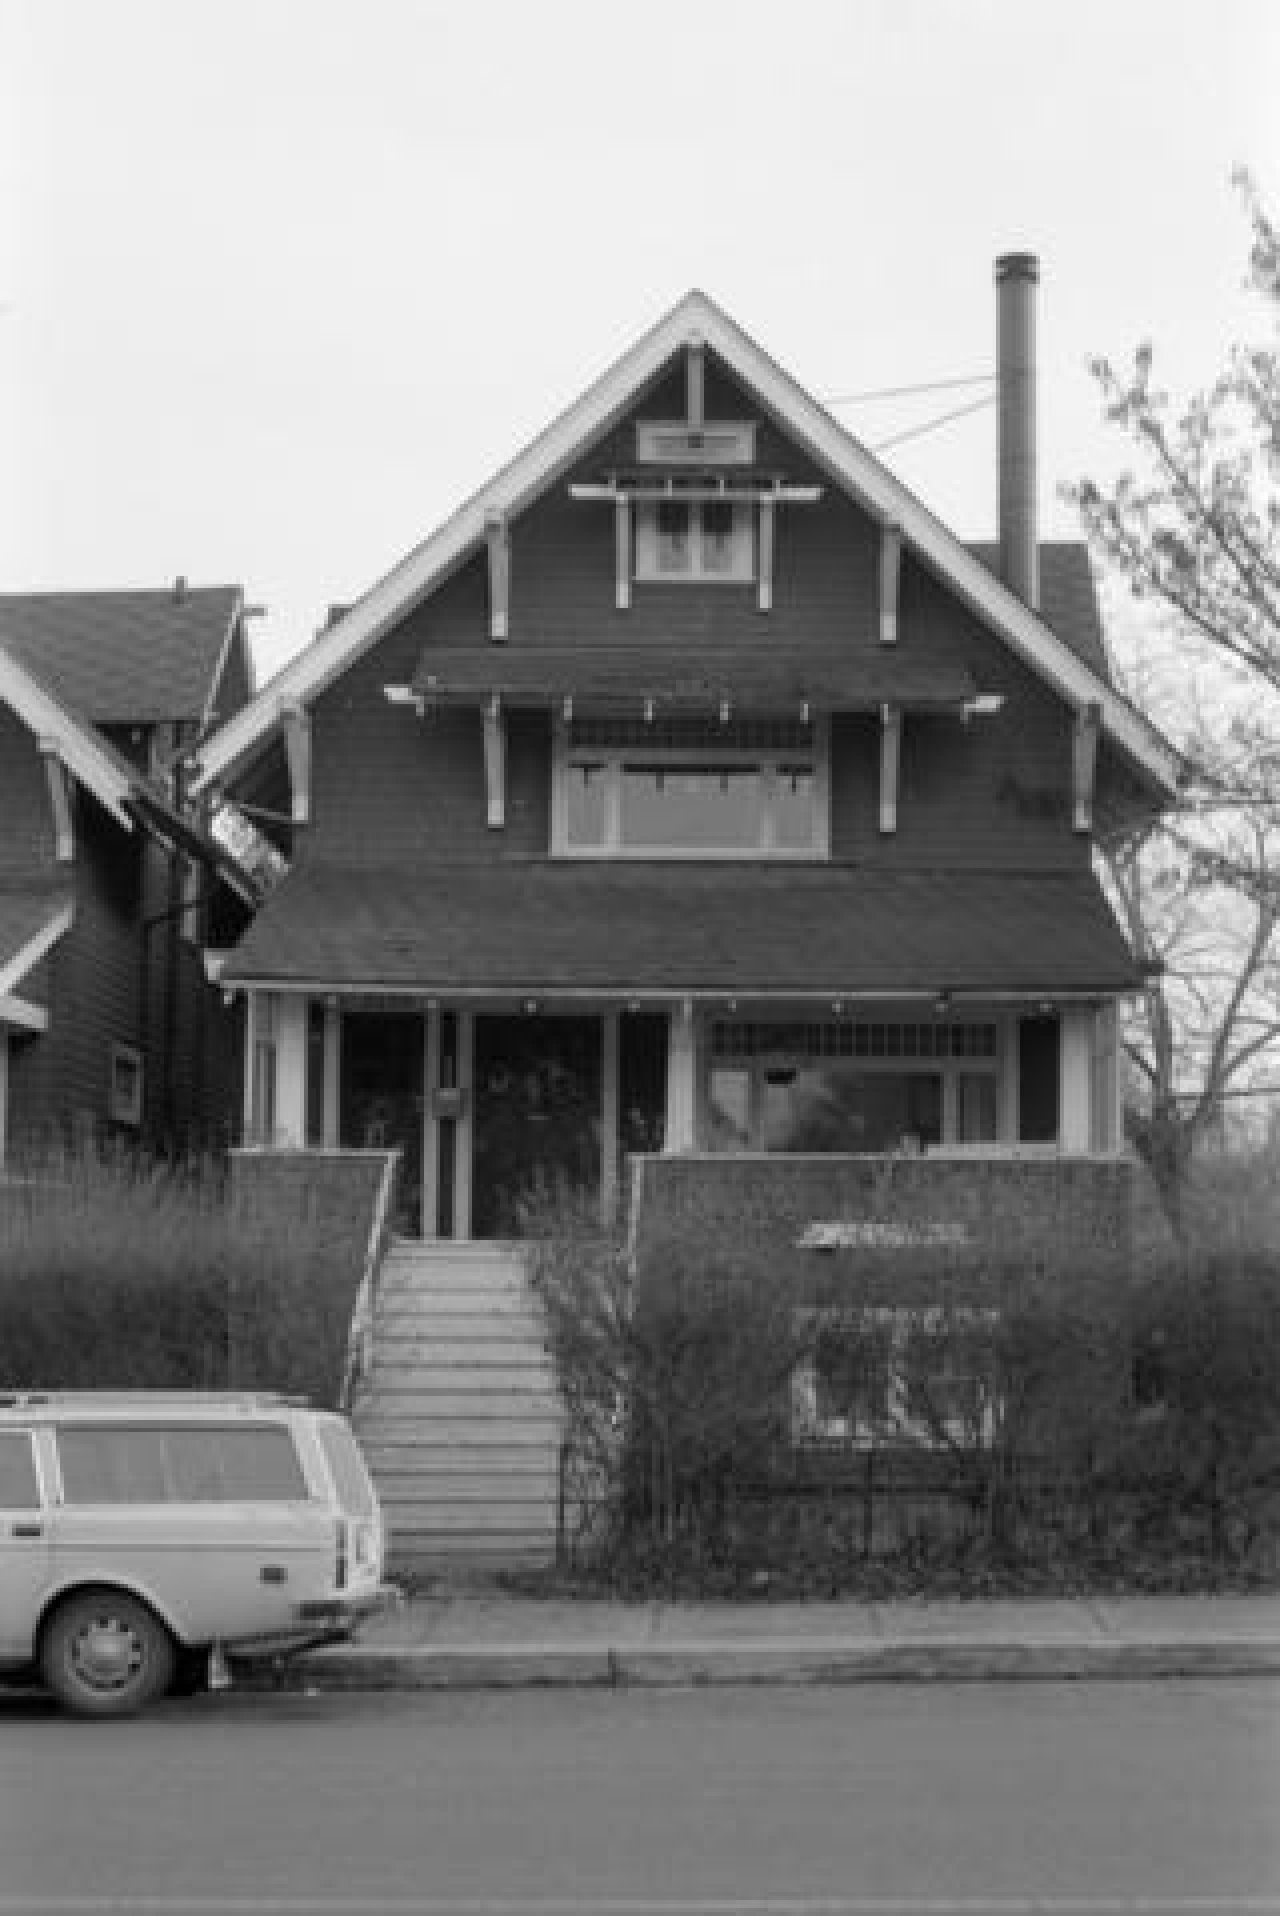 2150-2152 MacDonald St in 1986. Source: City of Vancouver Archives 791 0748_141